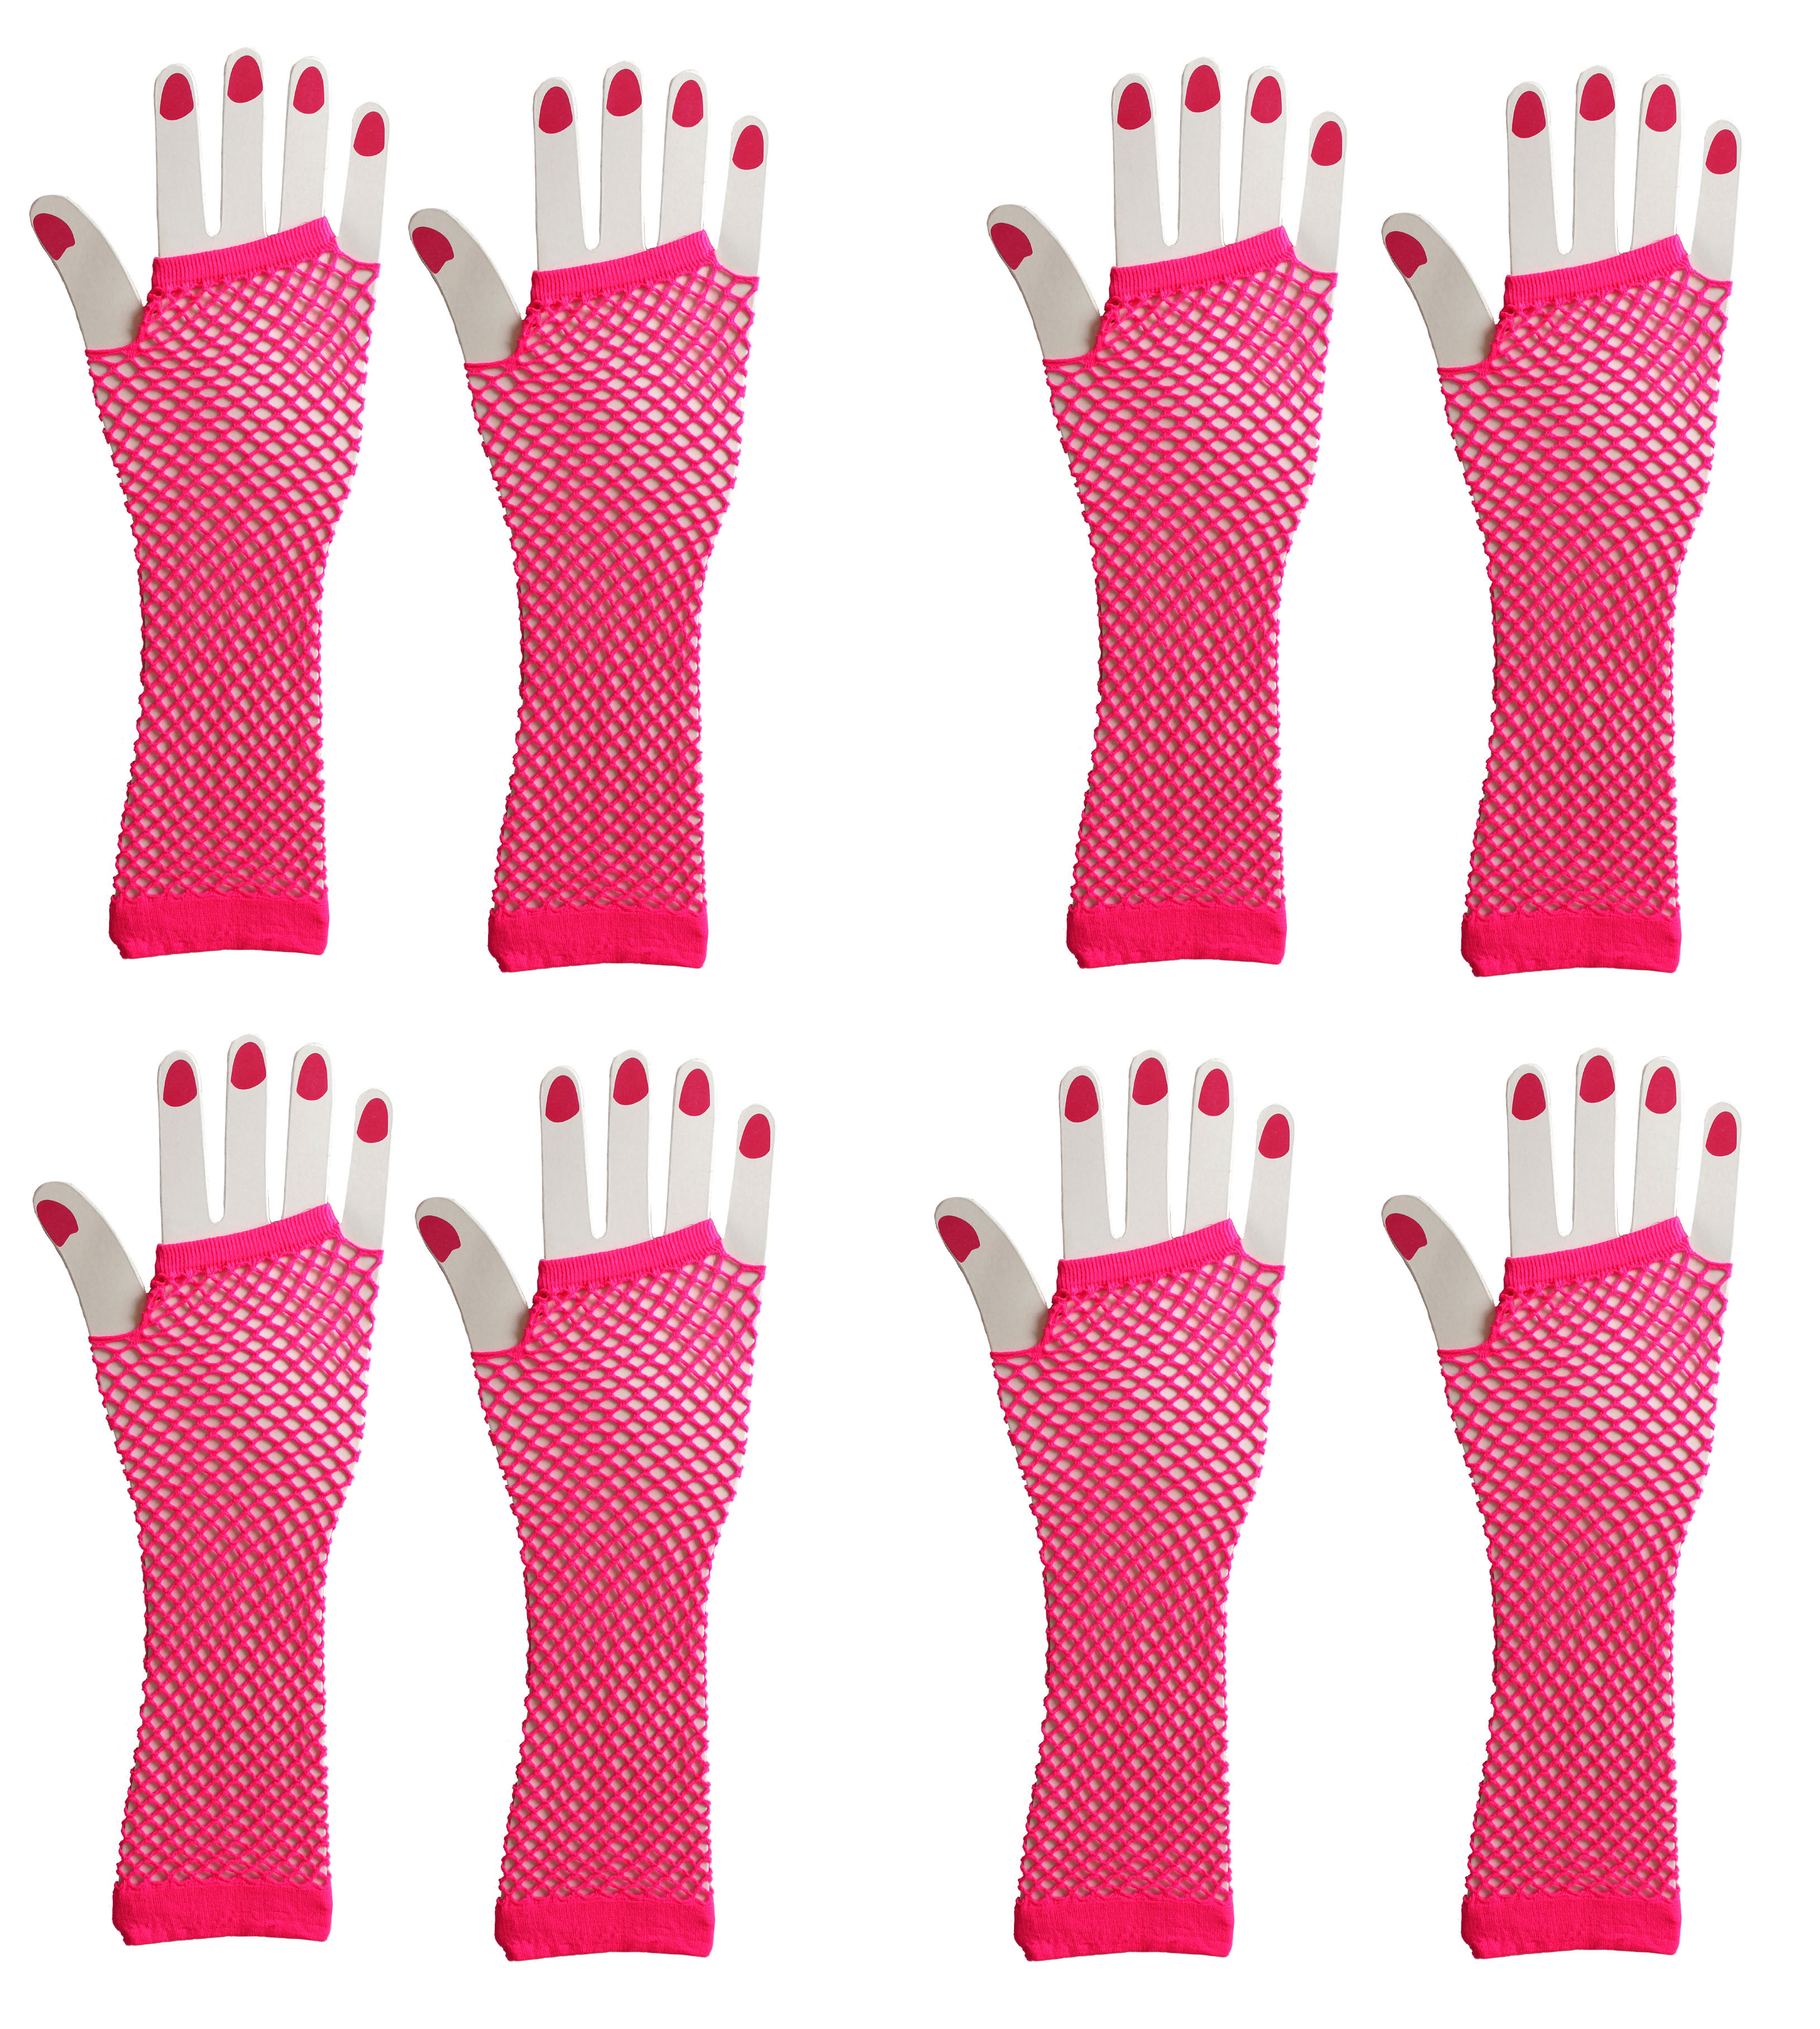 4 Pairs Long Stretchable Fingerless Fishnet Gloves – Eco-friendly